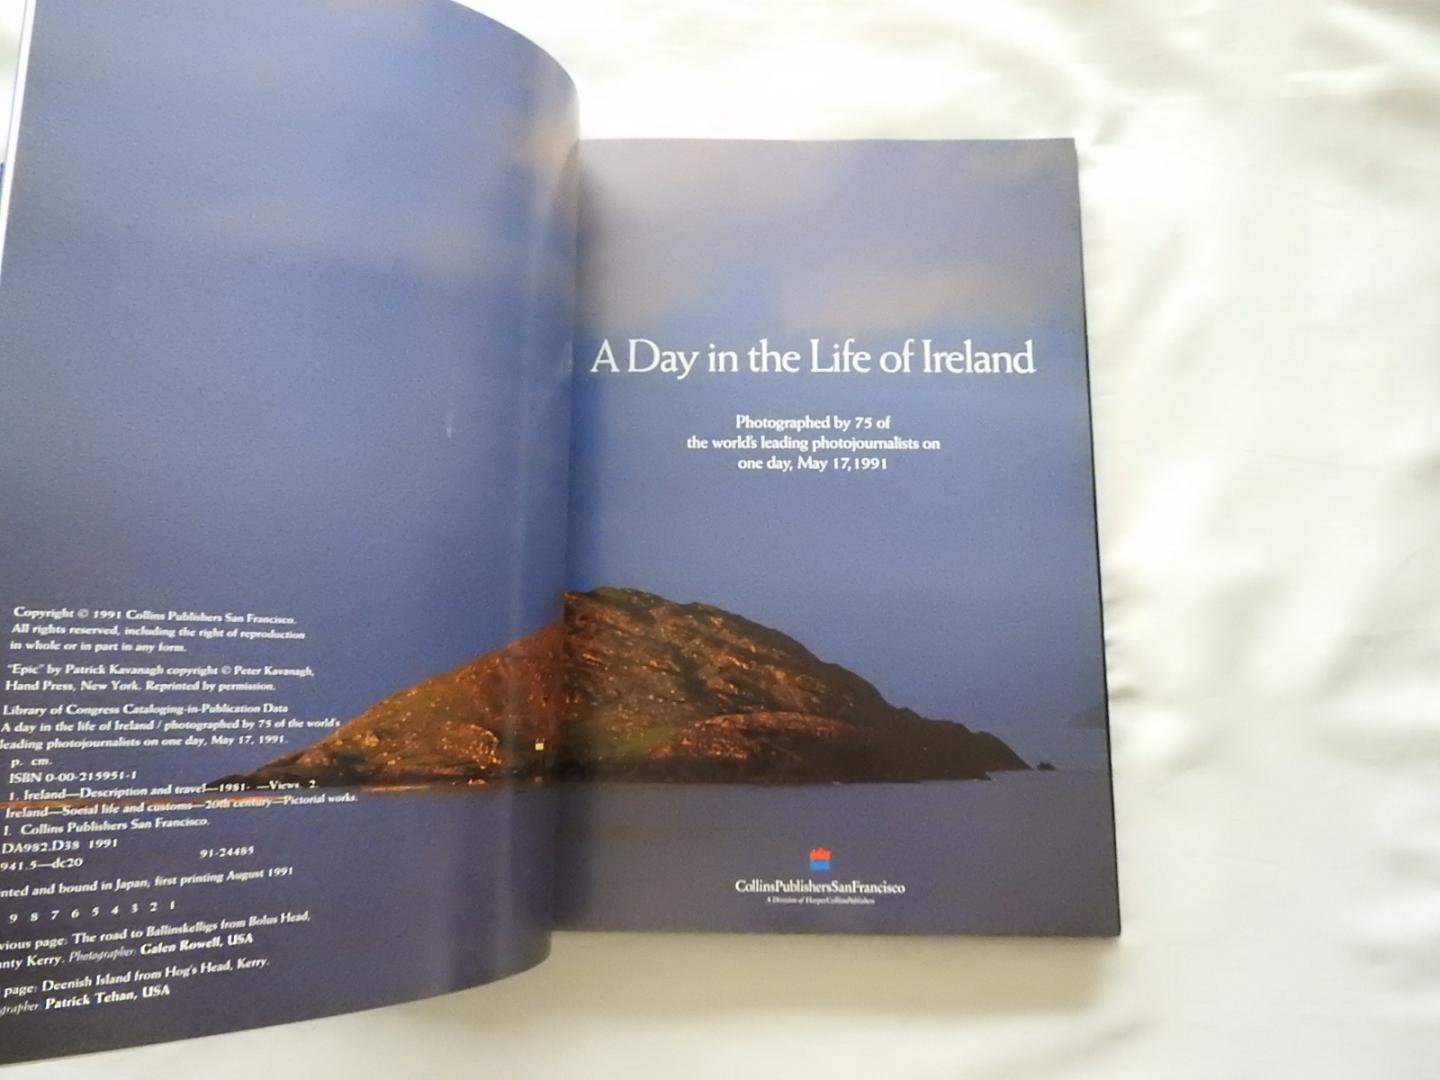 aer lingus - A day in the life of Ireland : photographed by 75 of the world's leading photojournalists on one day, May 17, 1991.